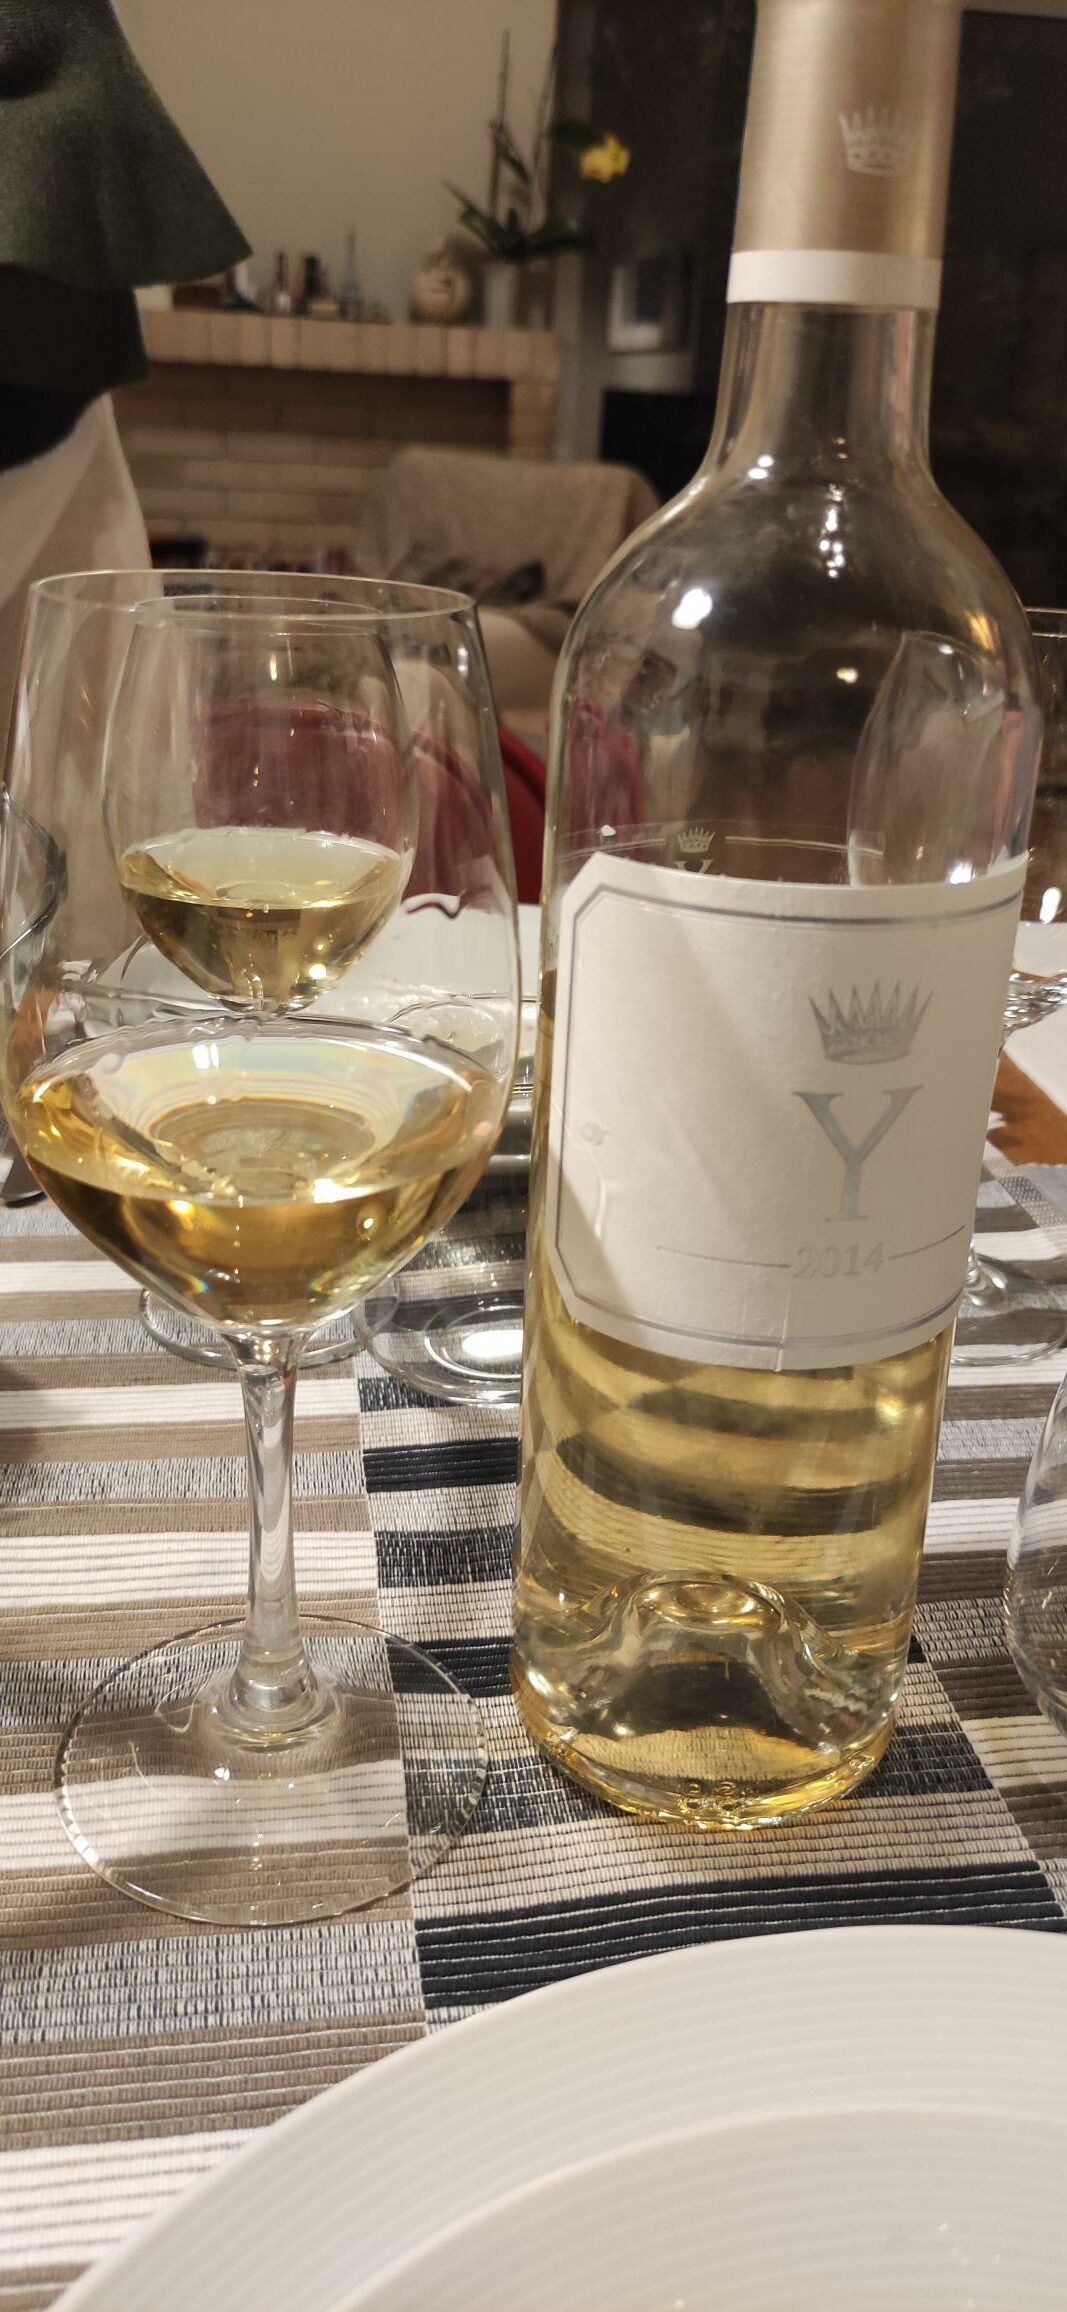 Read more about the article “Y” Ygrec 2014 – Chateau d’Yquem